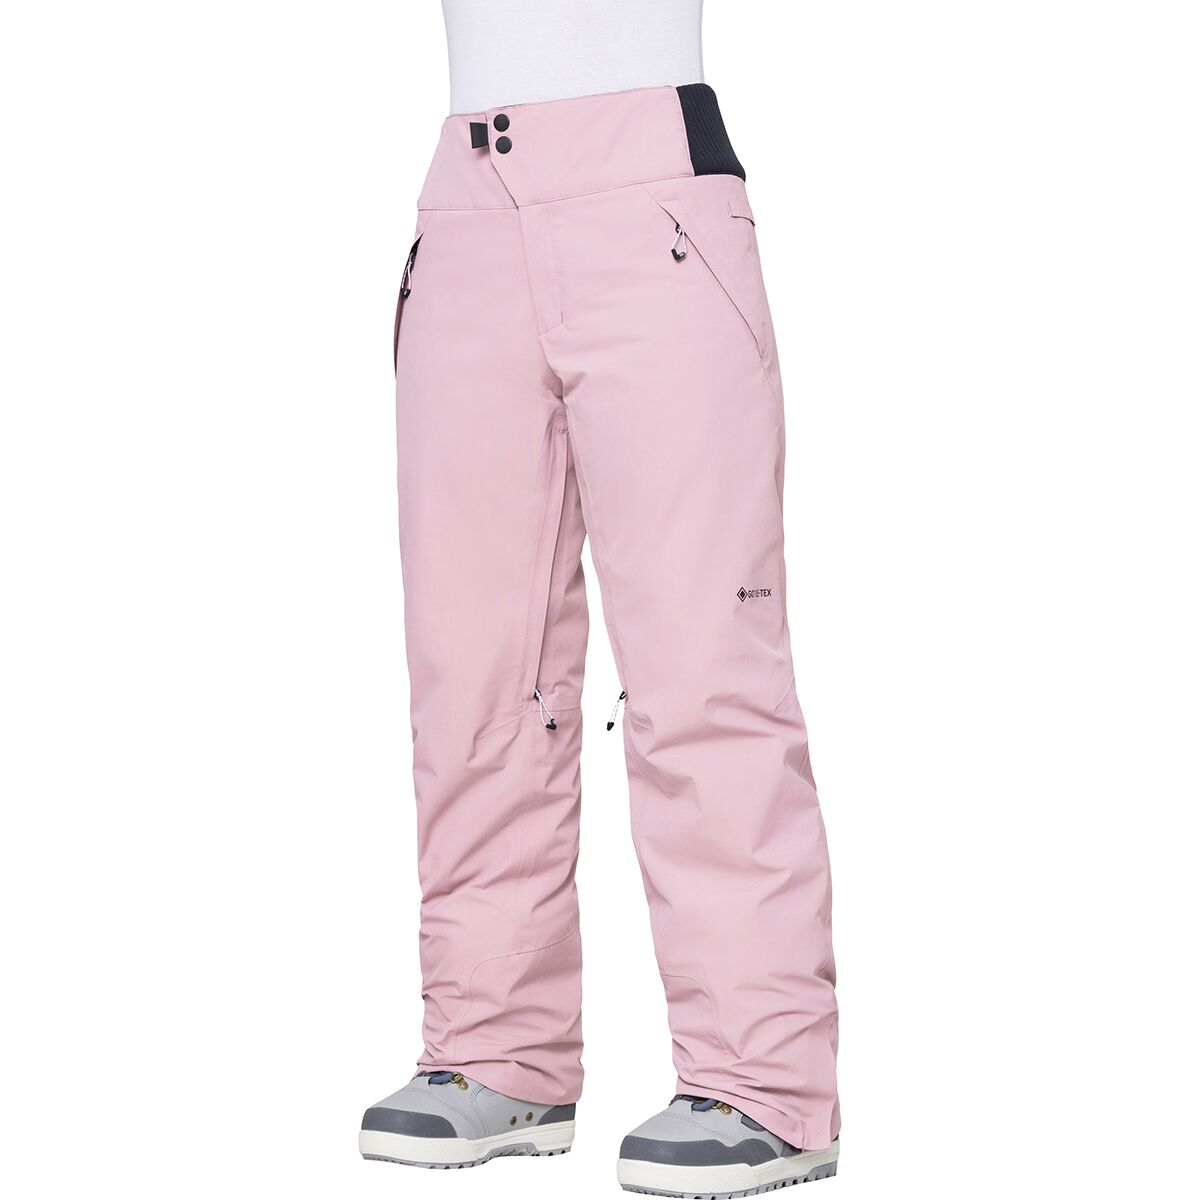 Willow GORE-TEX Insulated Pant - Women